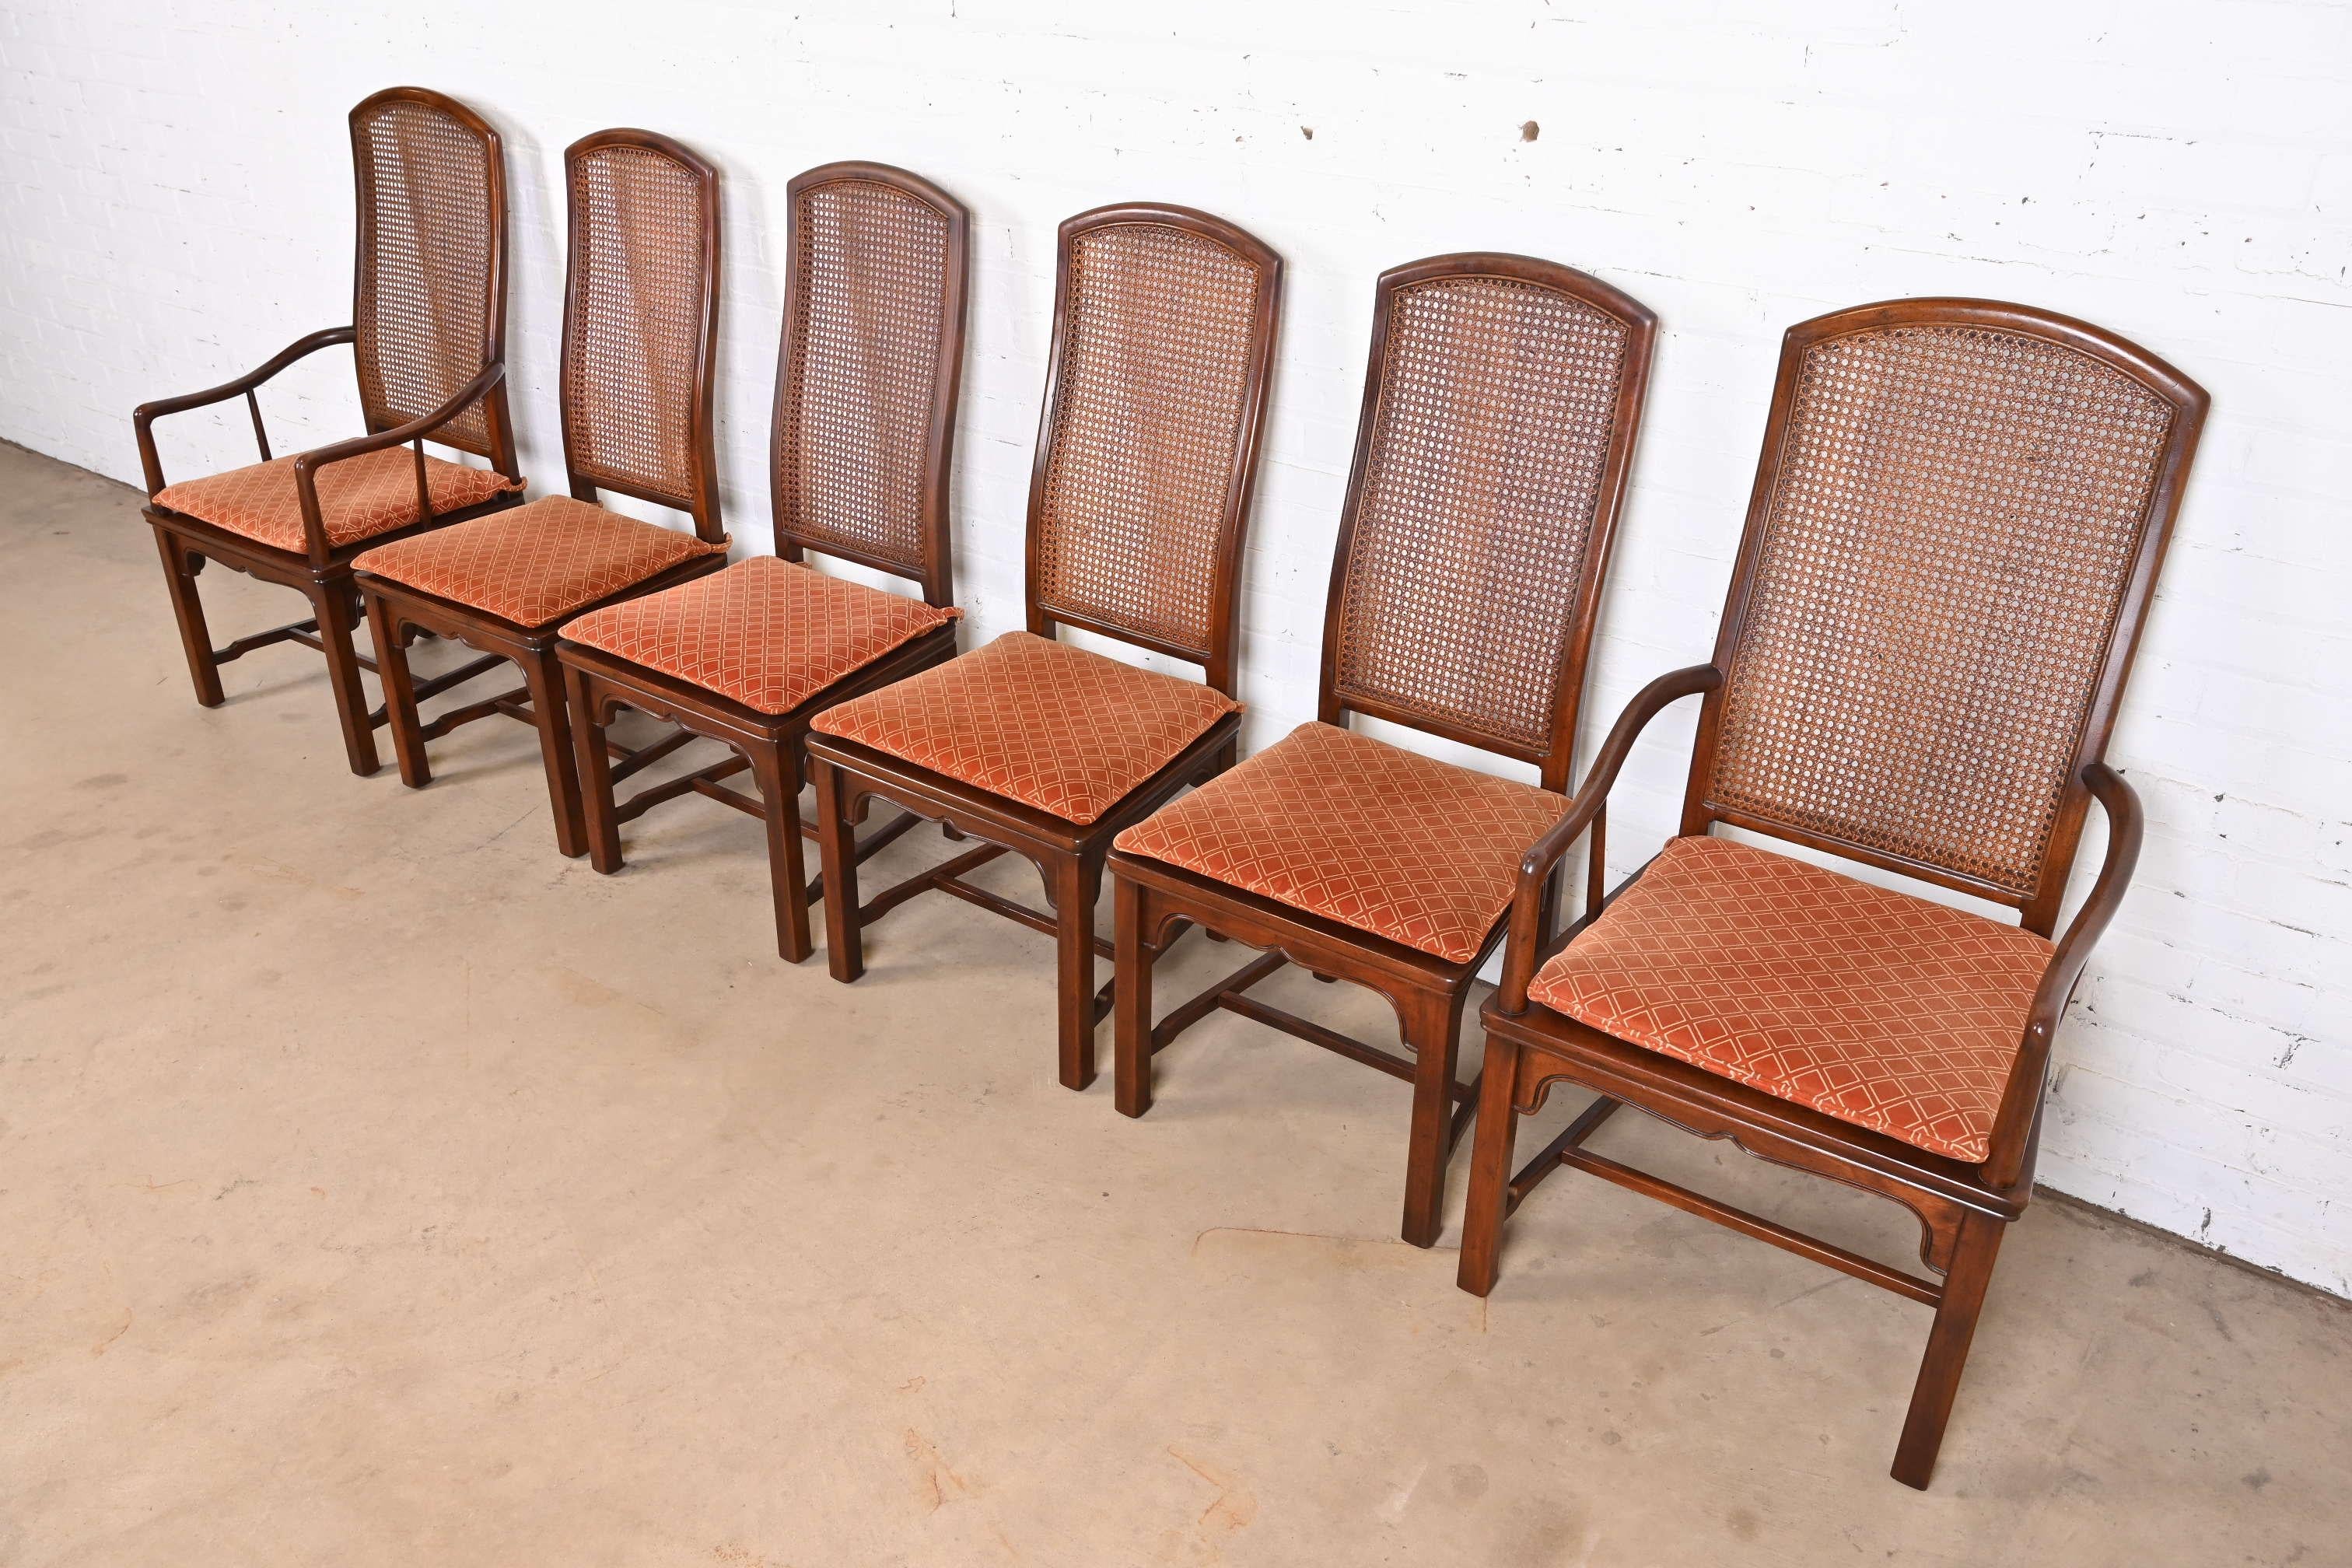 Henredon Hollywood Regency Chinoiserie Sculpted Mahogany Dining Chairs, Set of 6 In Good Condition For Sale In South Bend, IN